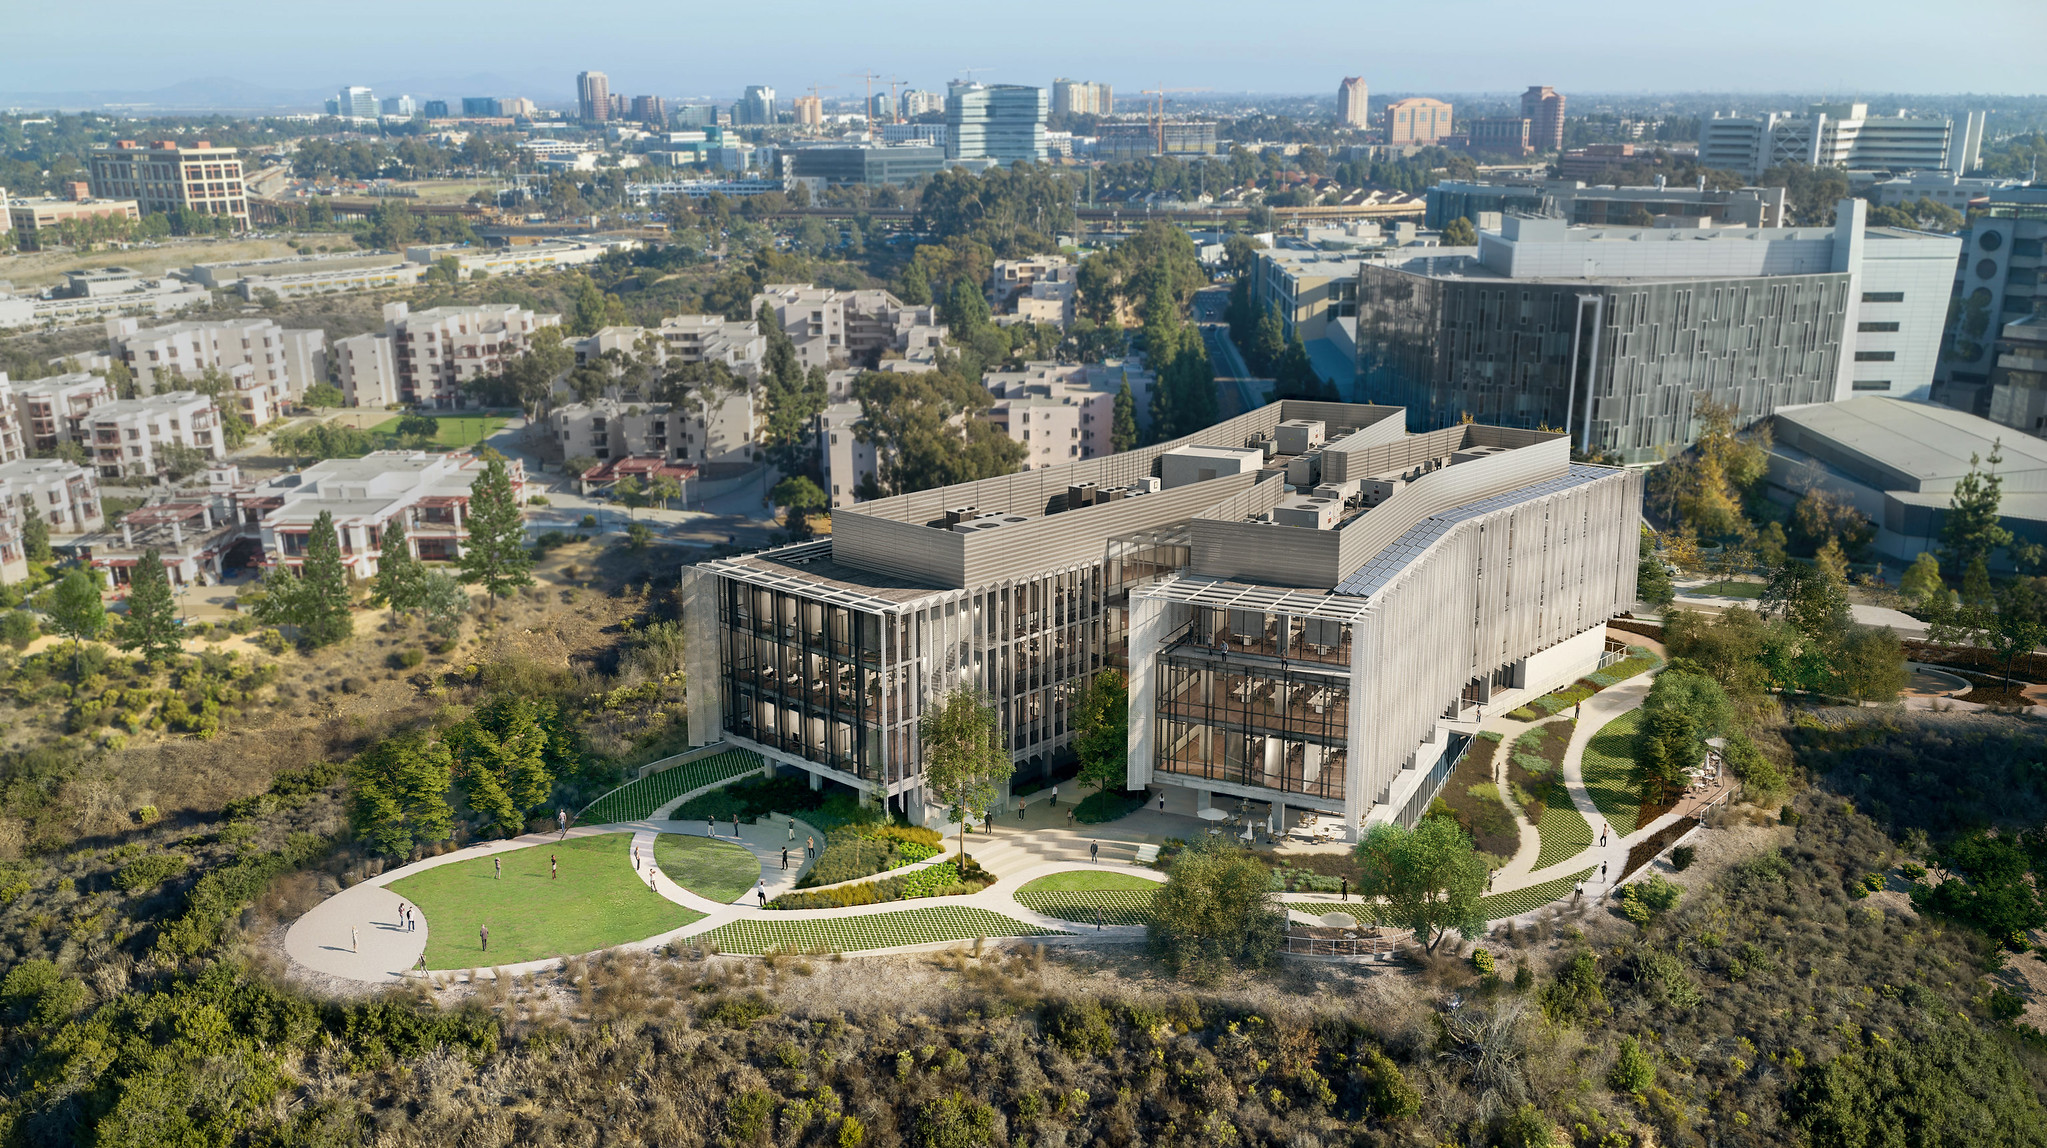 UC San Diego Named Nation’s 8th Best Public University by U.S. News